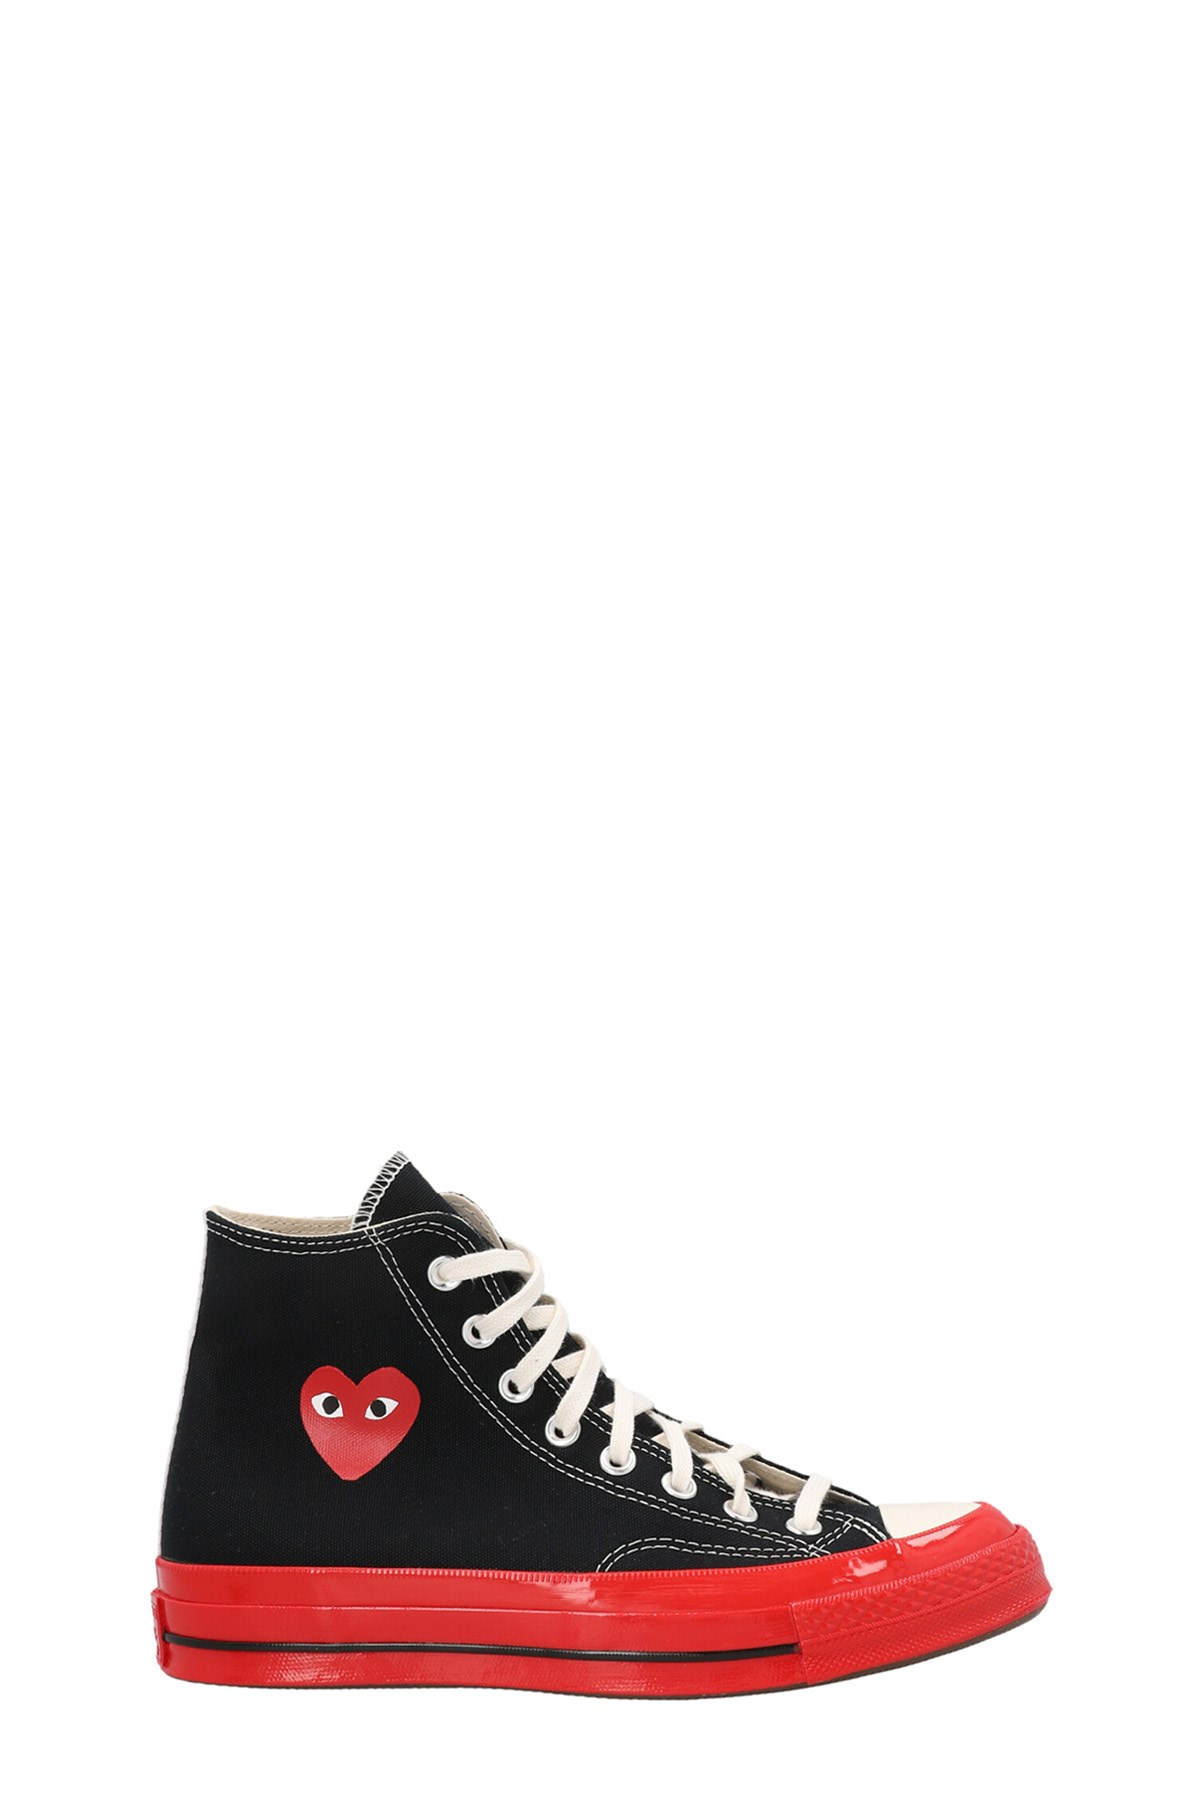 COMME DES GARÇONS PLAY Comme Des Garçons Play X Converse Sneakers